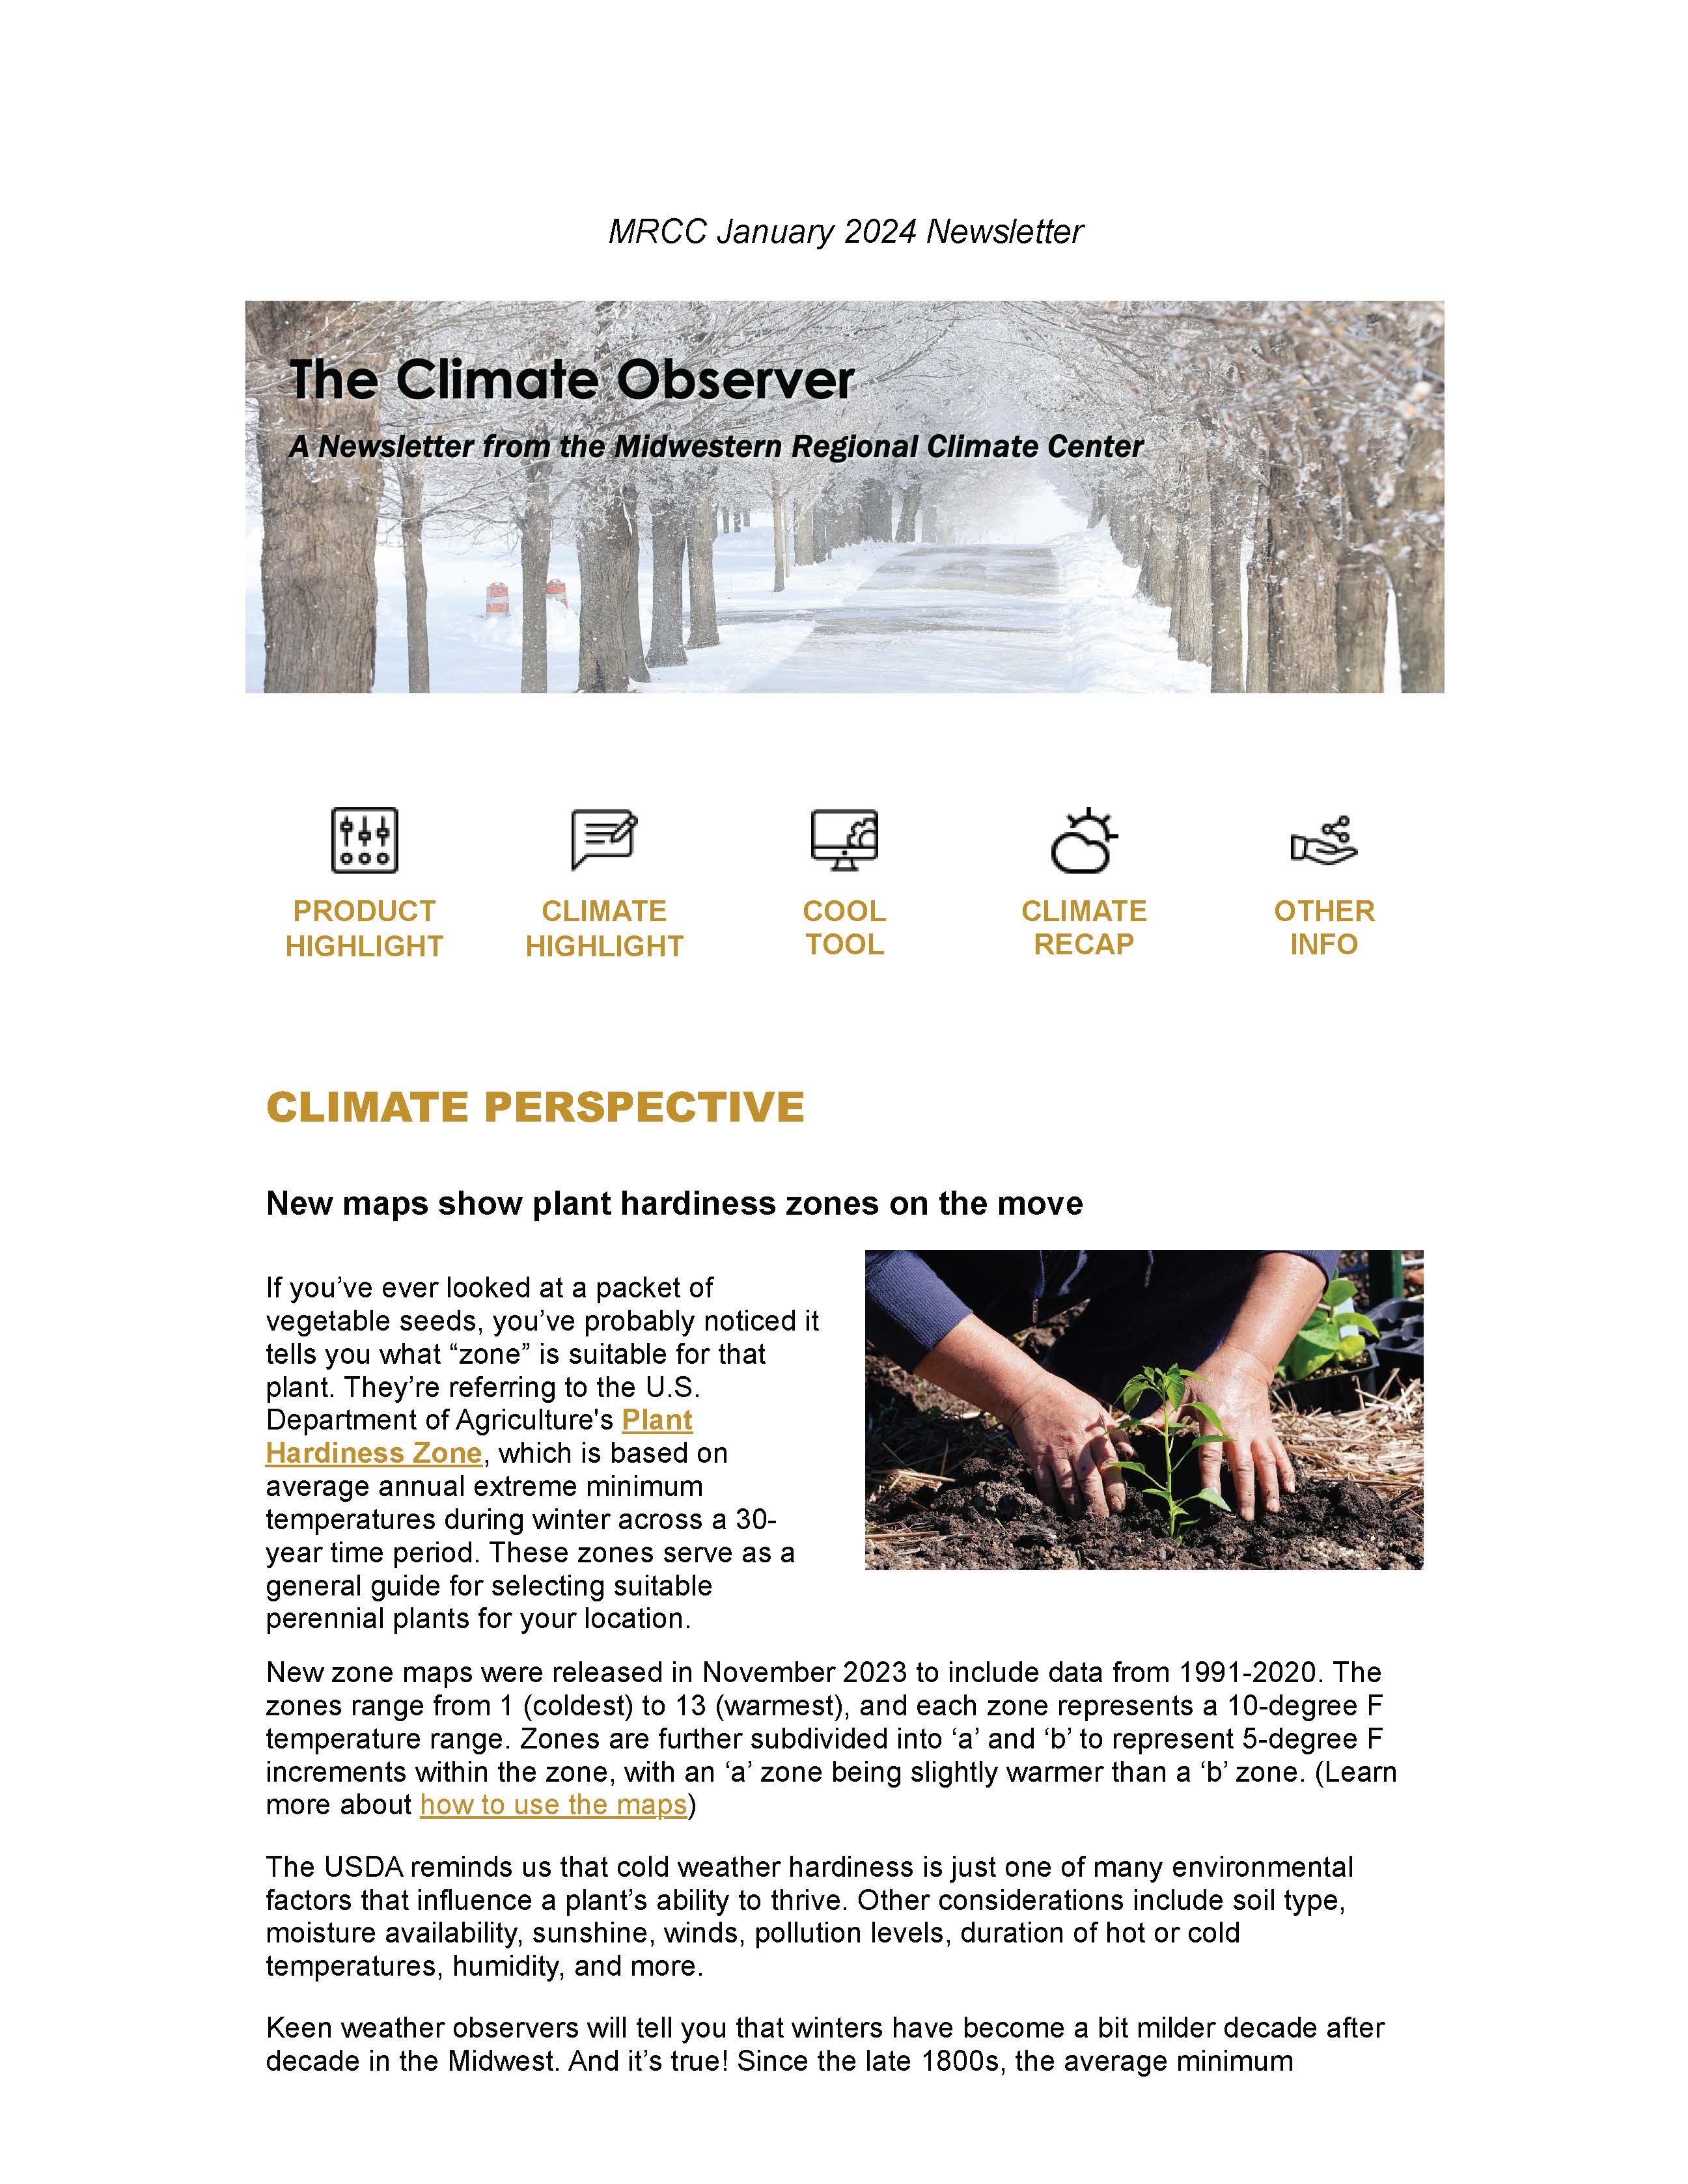 January 2024 "The Climate Observer"